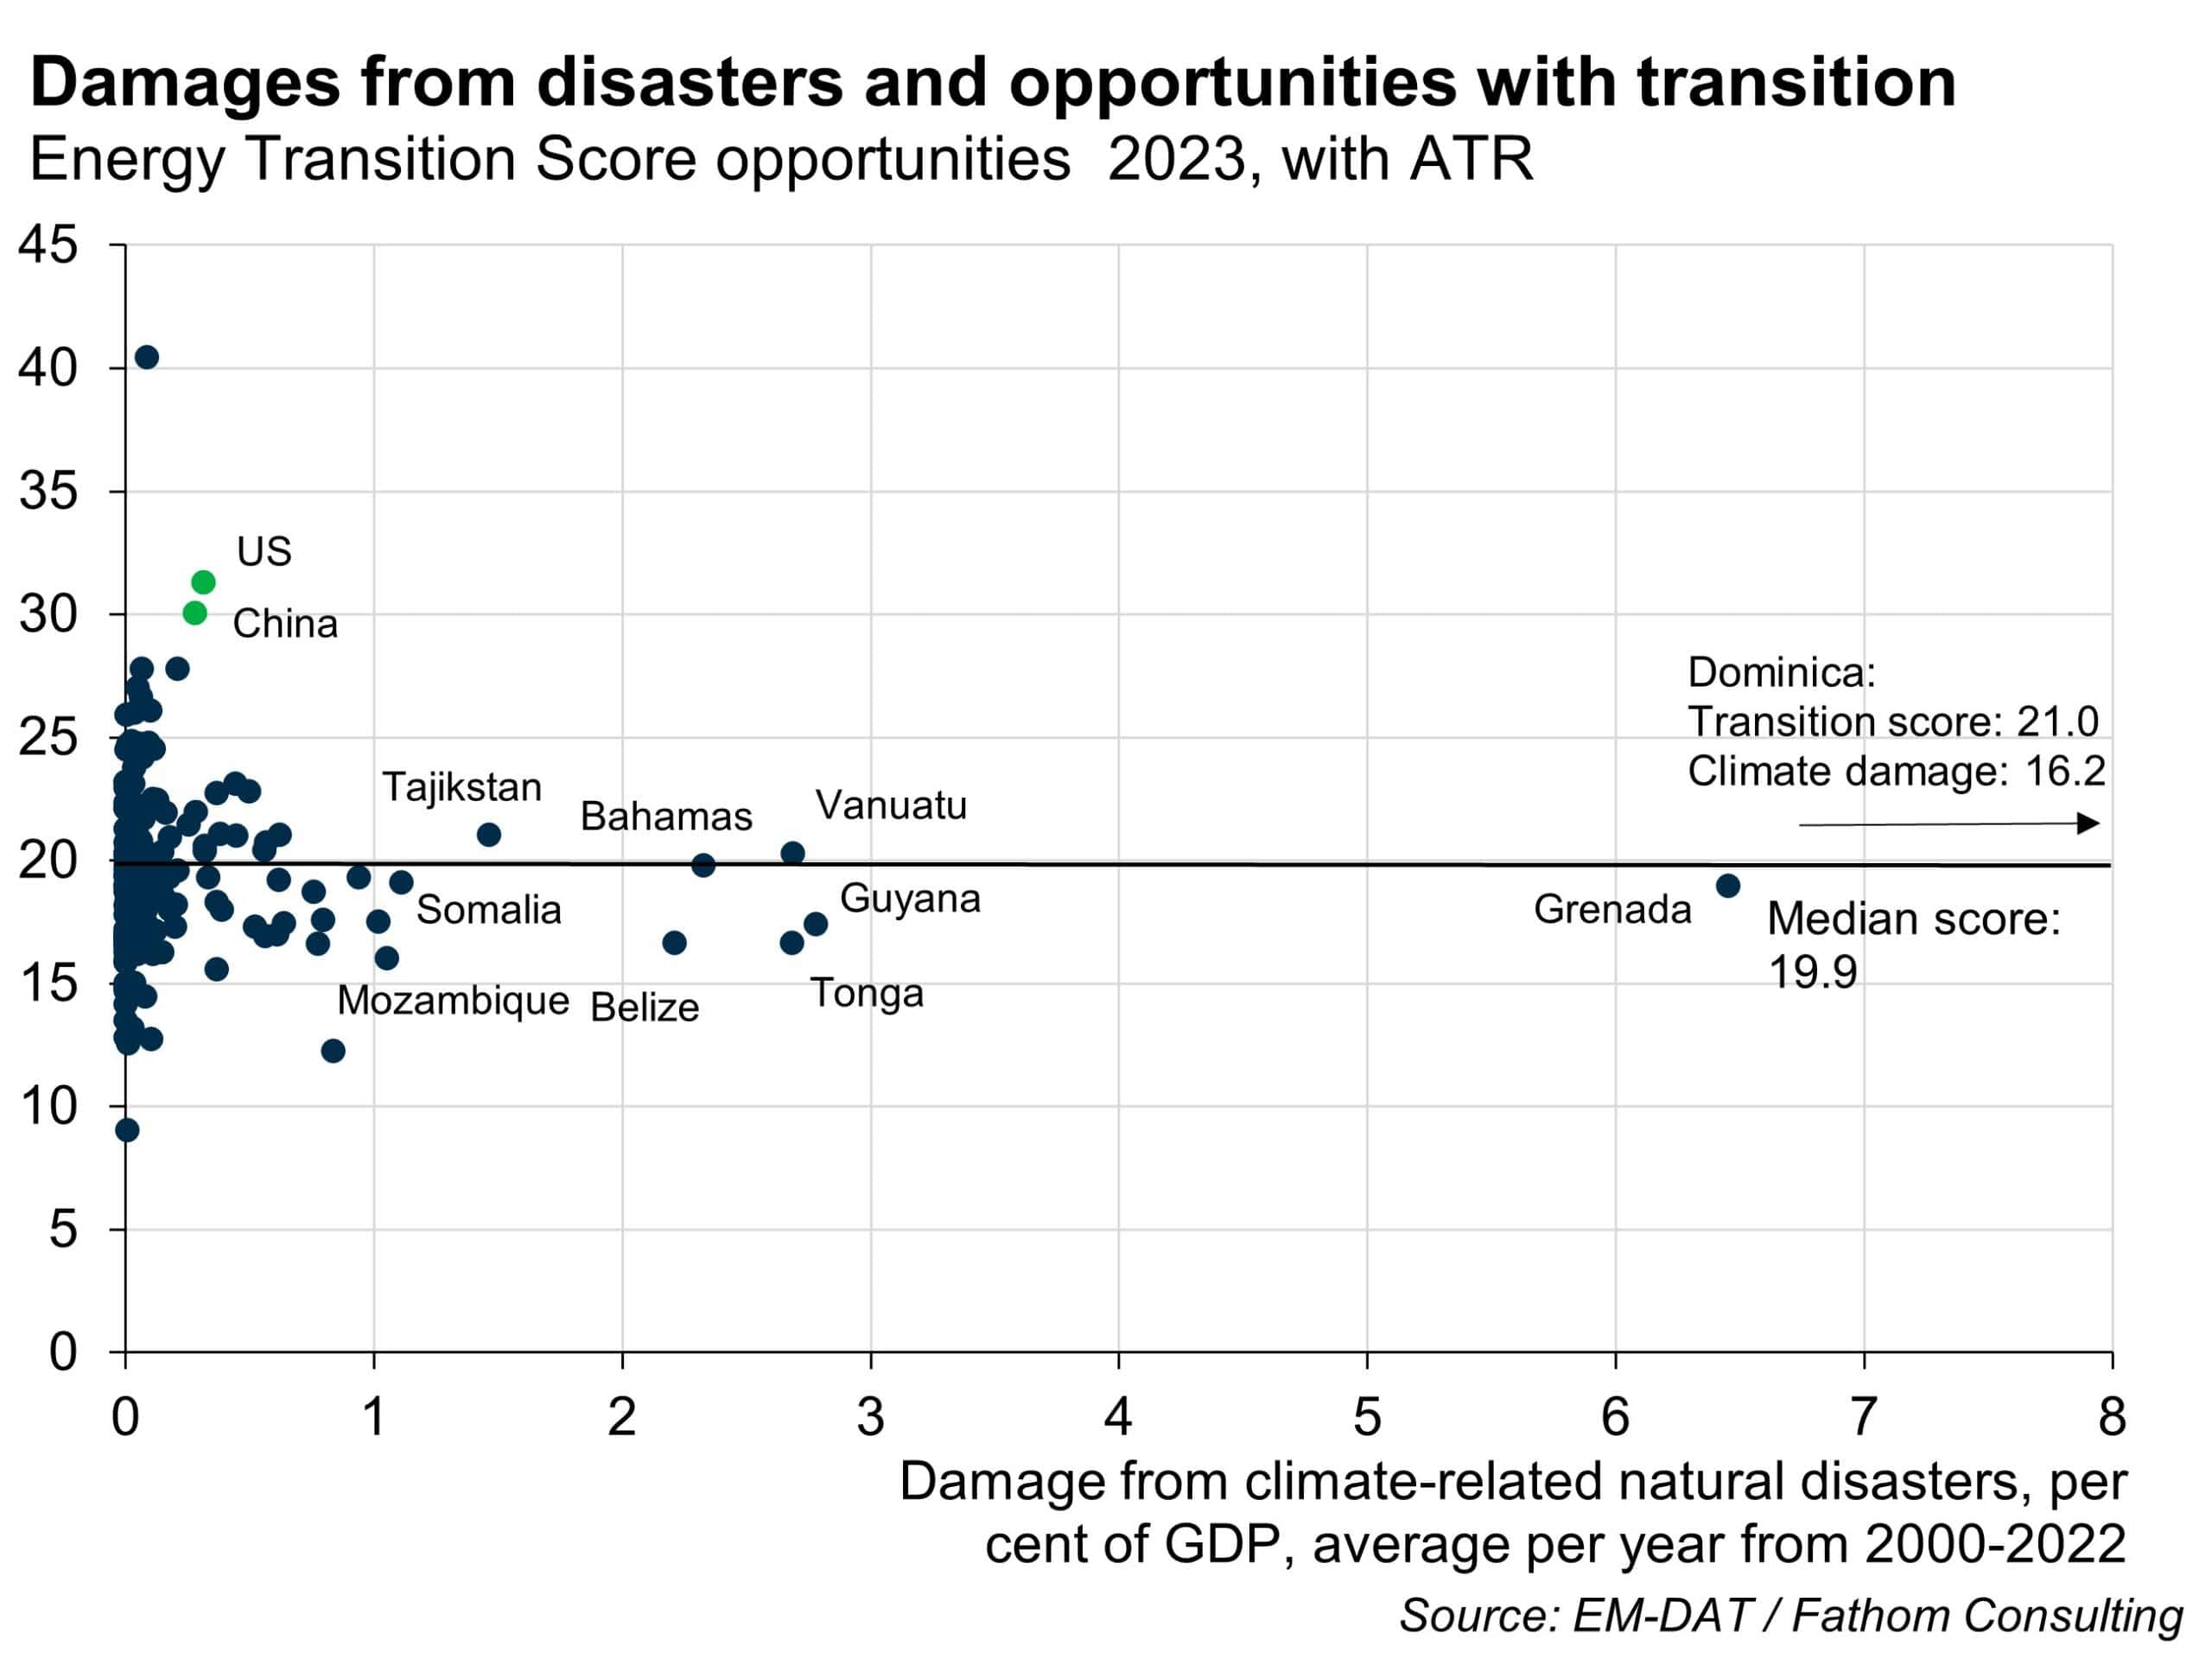 Damages from disasters and opportunities with transition, scored by damage from climate-related natural disasters as a per cent of GDP, as an average per year between 2000 and 2022